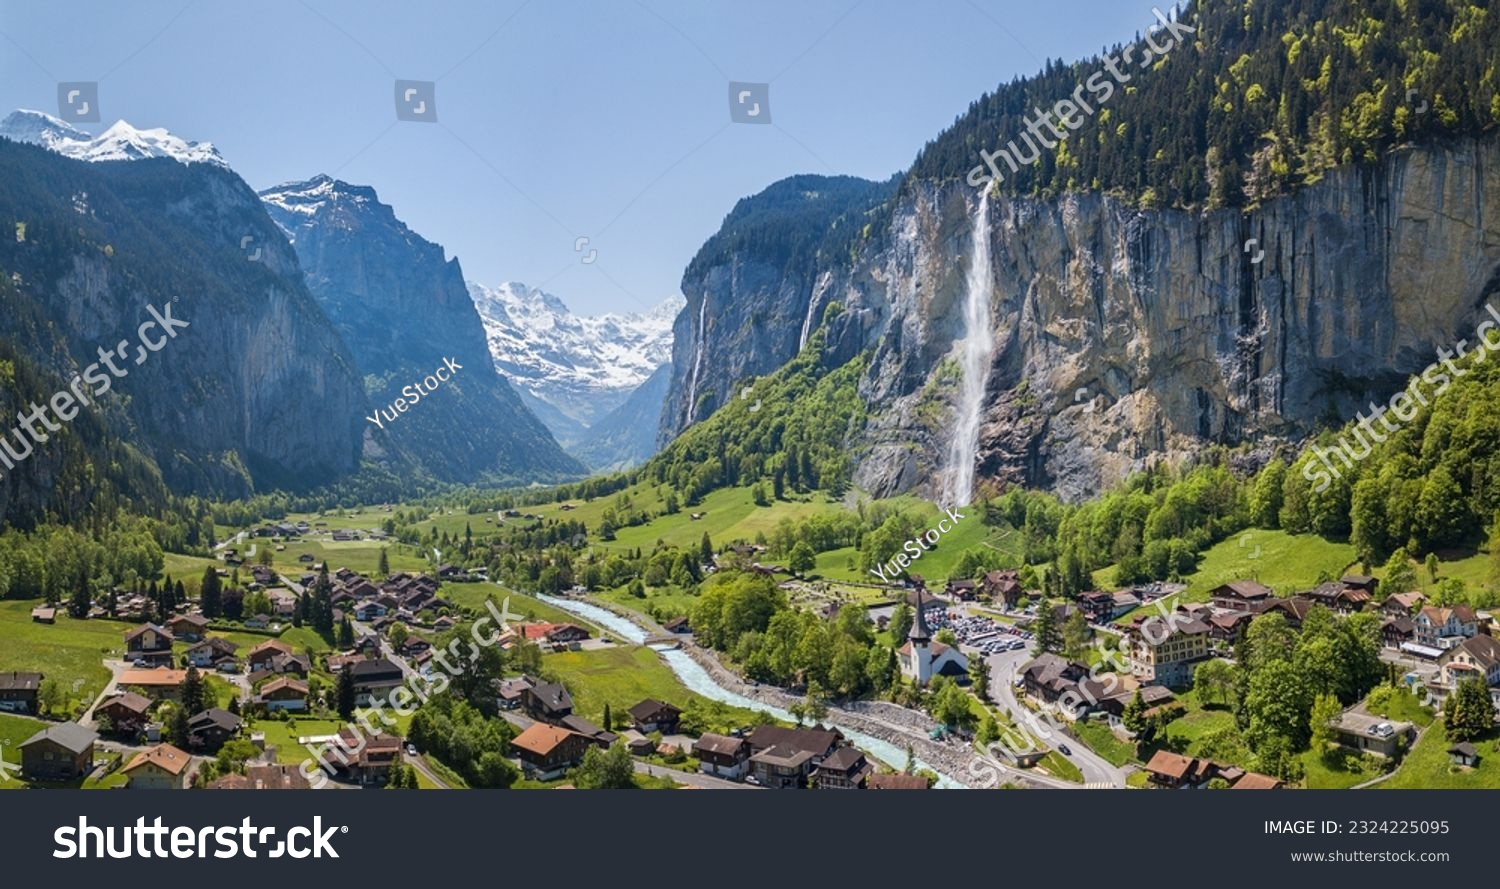 Aerial panorama image of the beautiful village Lauterbrunnen with Staubbach waterfall and snow mountain Jungfrau at the background #2324225095